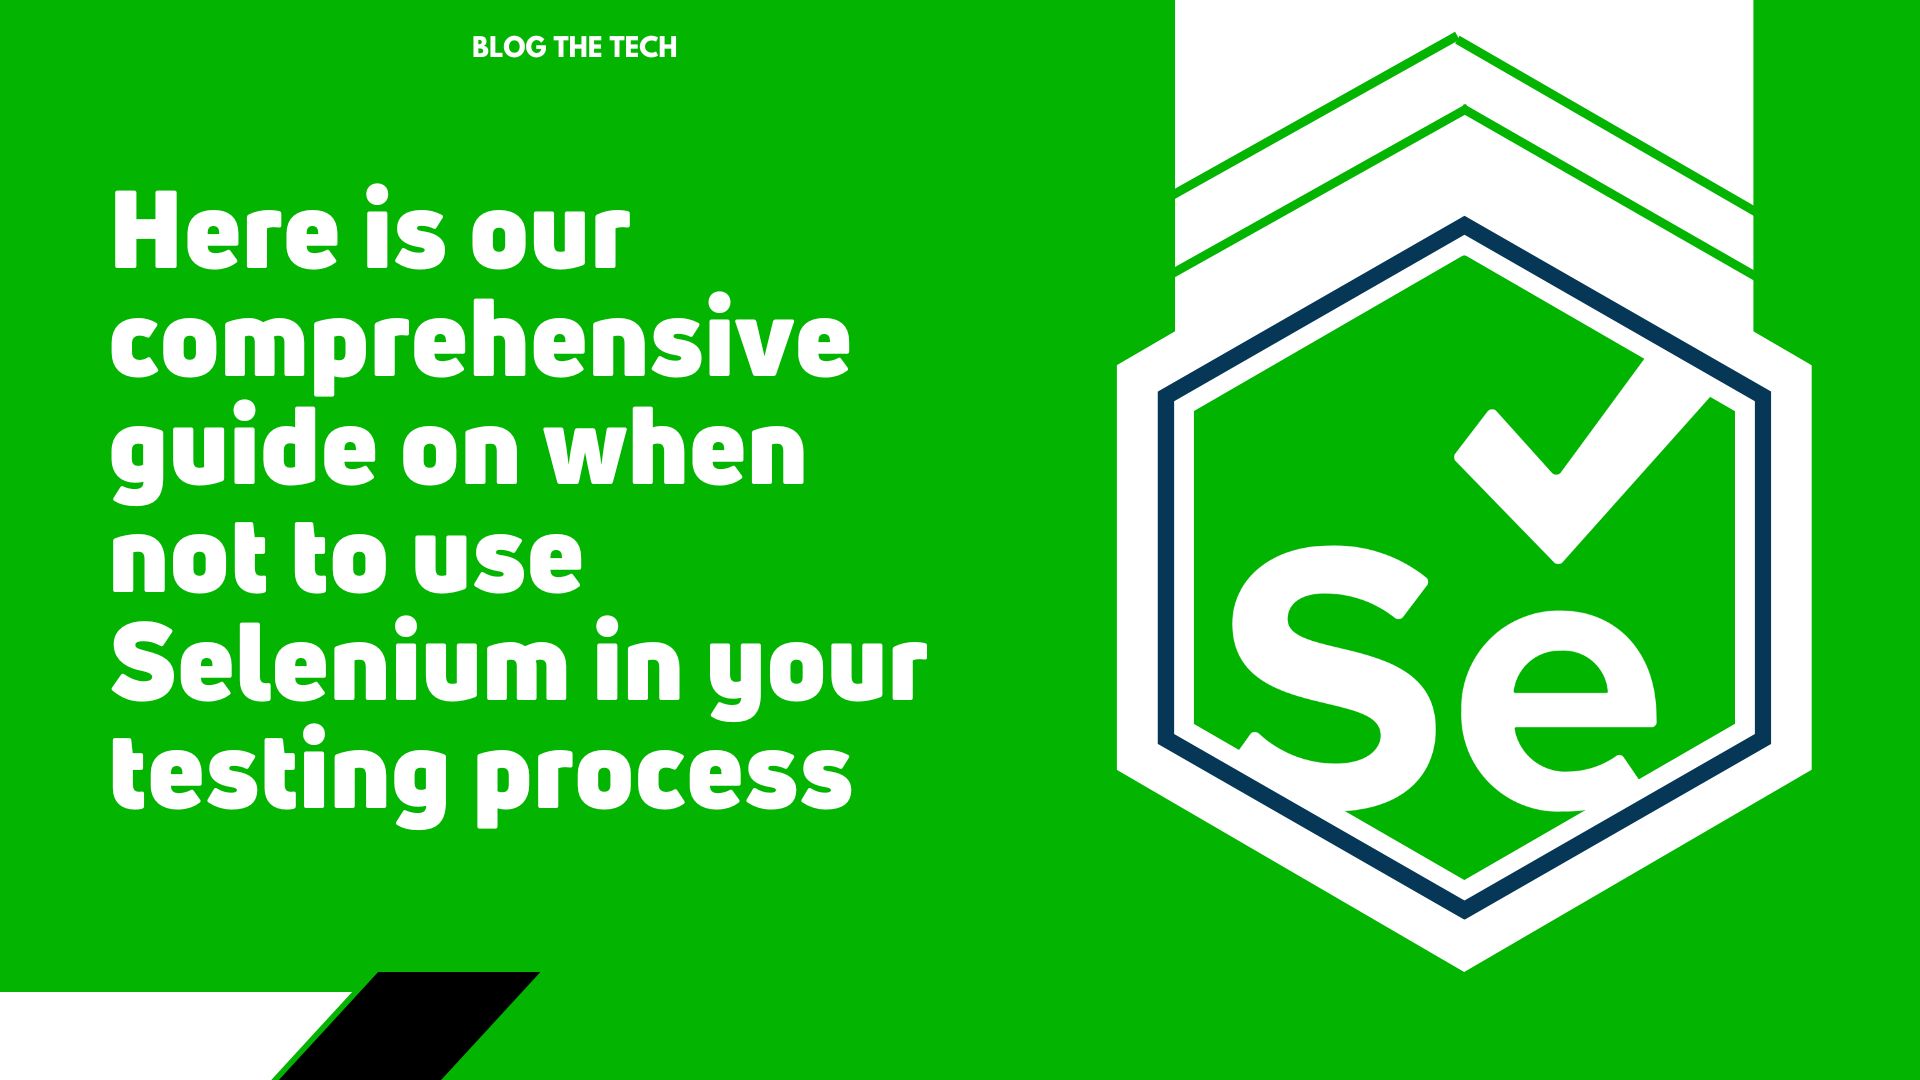 Here is our comprehensive guide on when not to use Selenium in your testing process